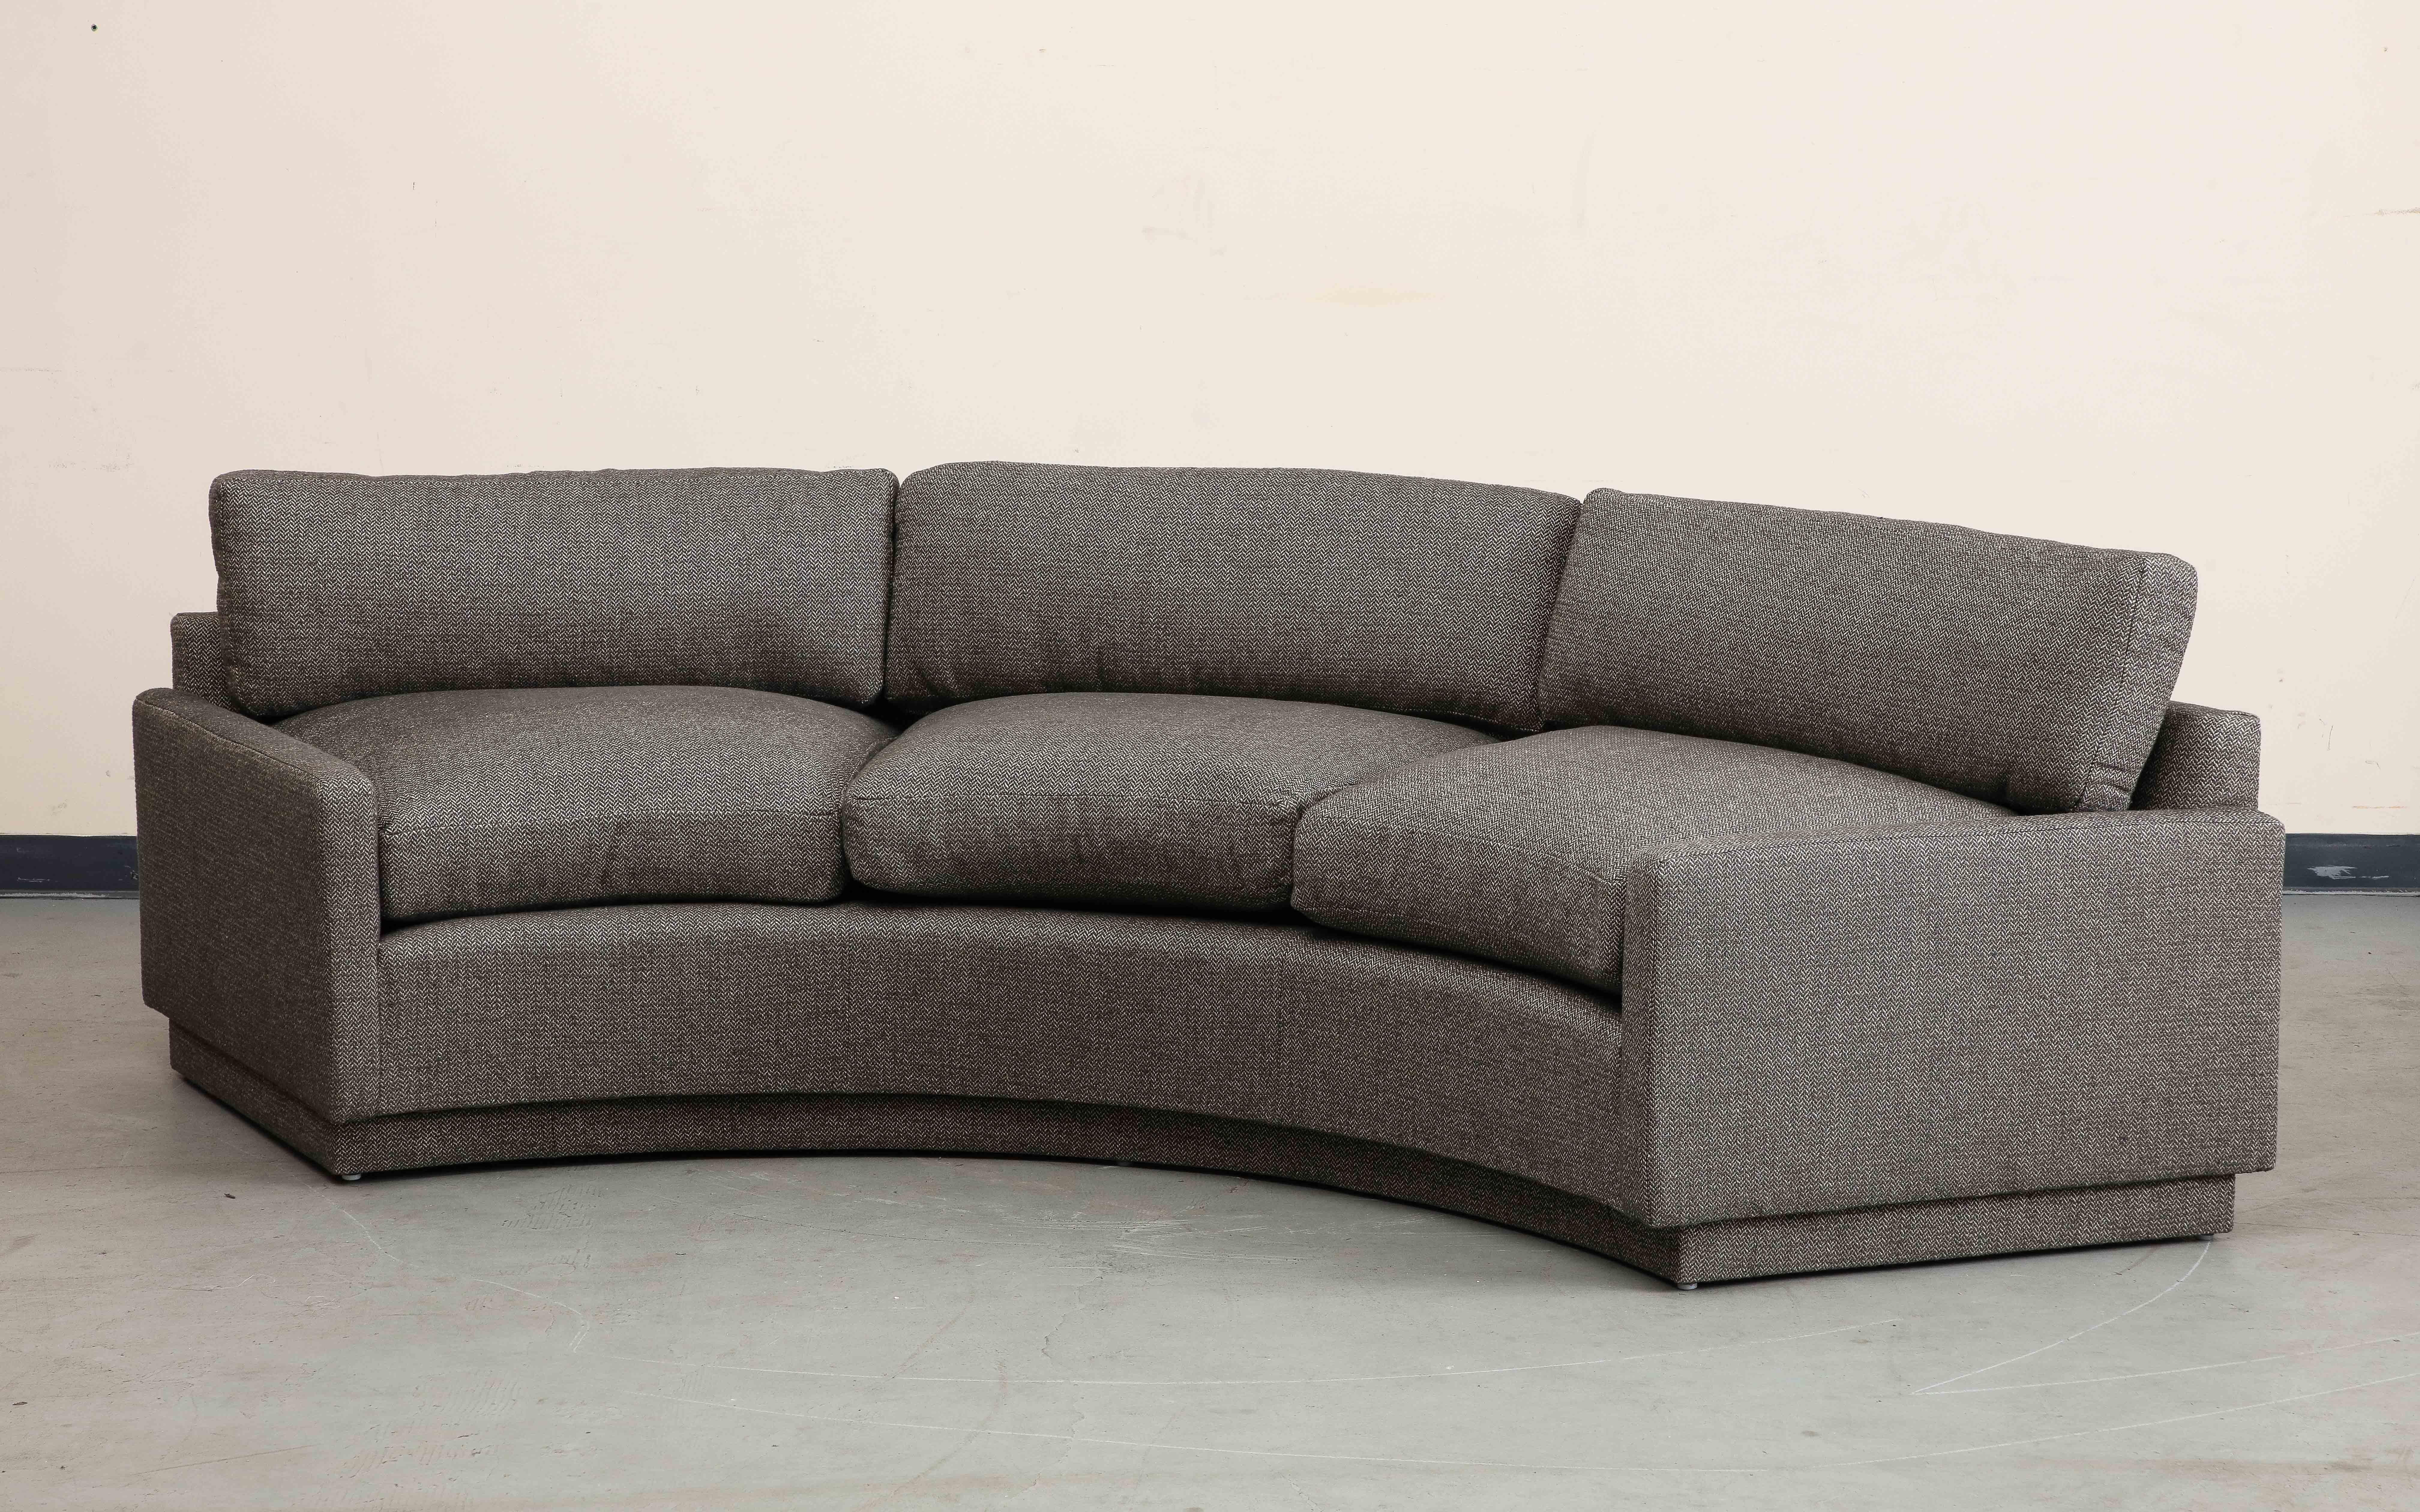 Milo Baughman Curved Three Seat Sofa, 1970, Newly Upholstered in Cotton Linen For Sale 2